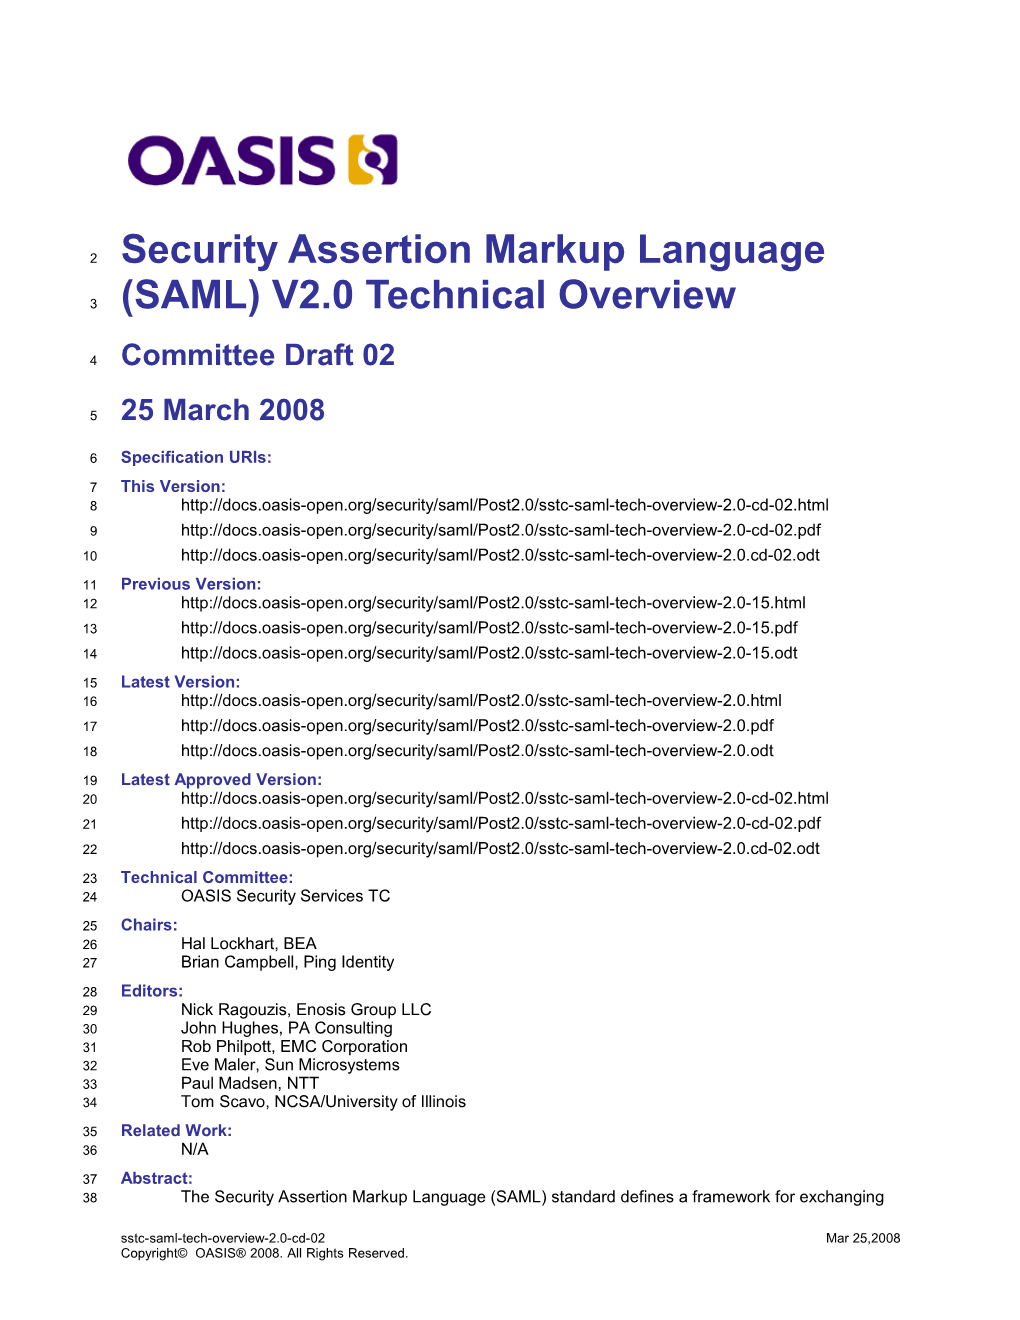 Security Assertion Markup Language (SAML) V2.0 Technical Overview